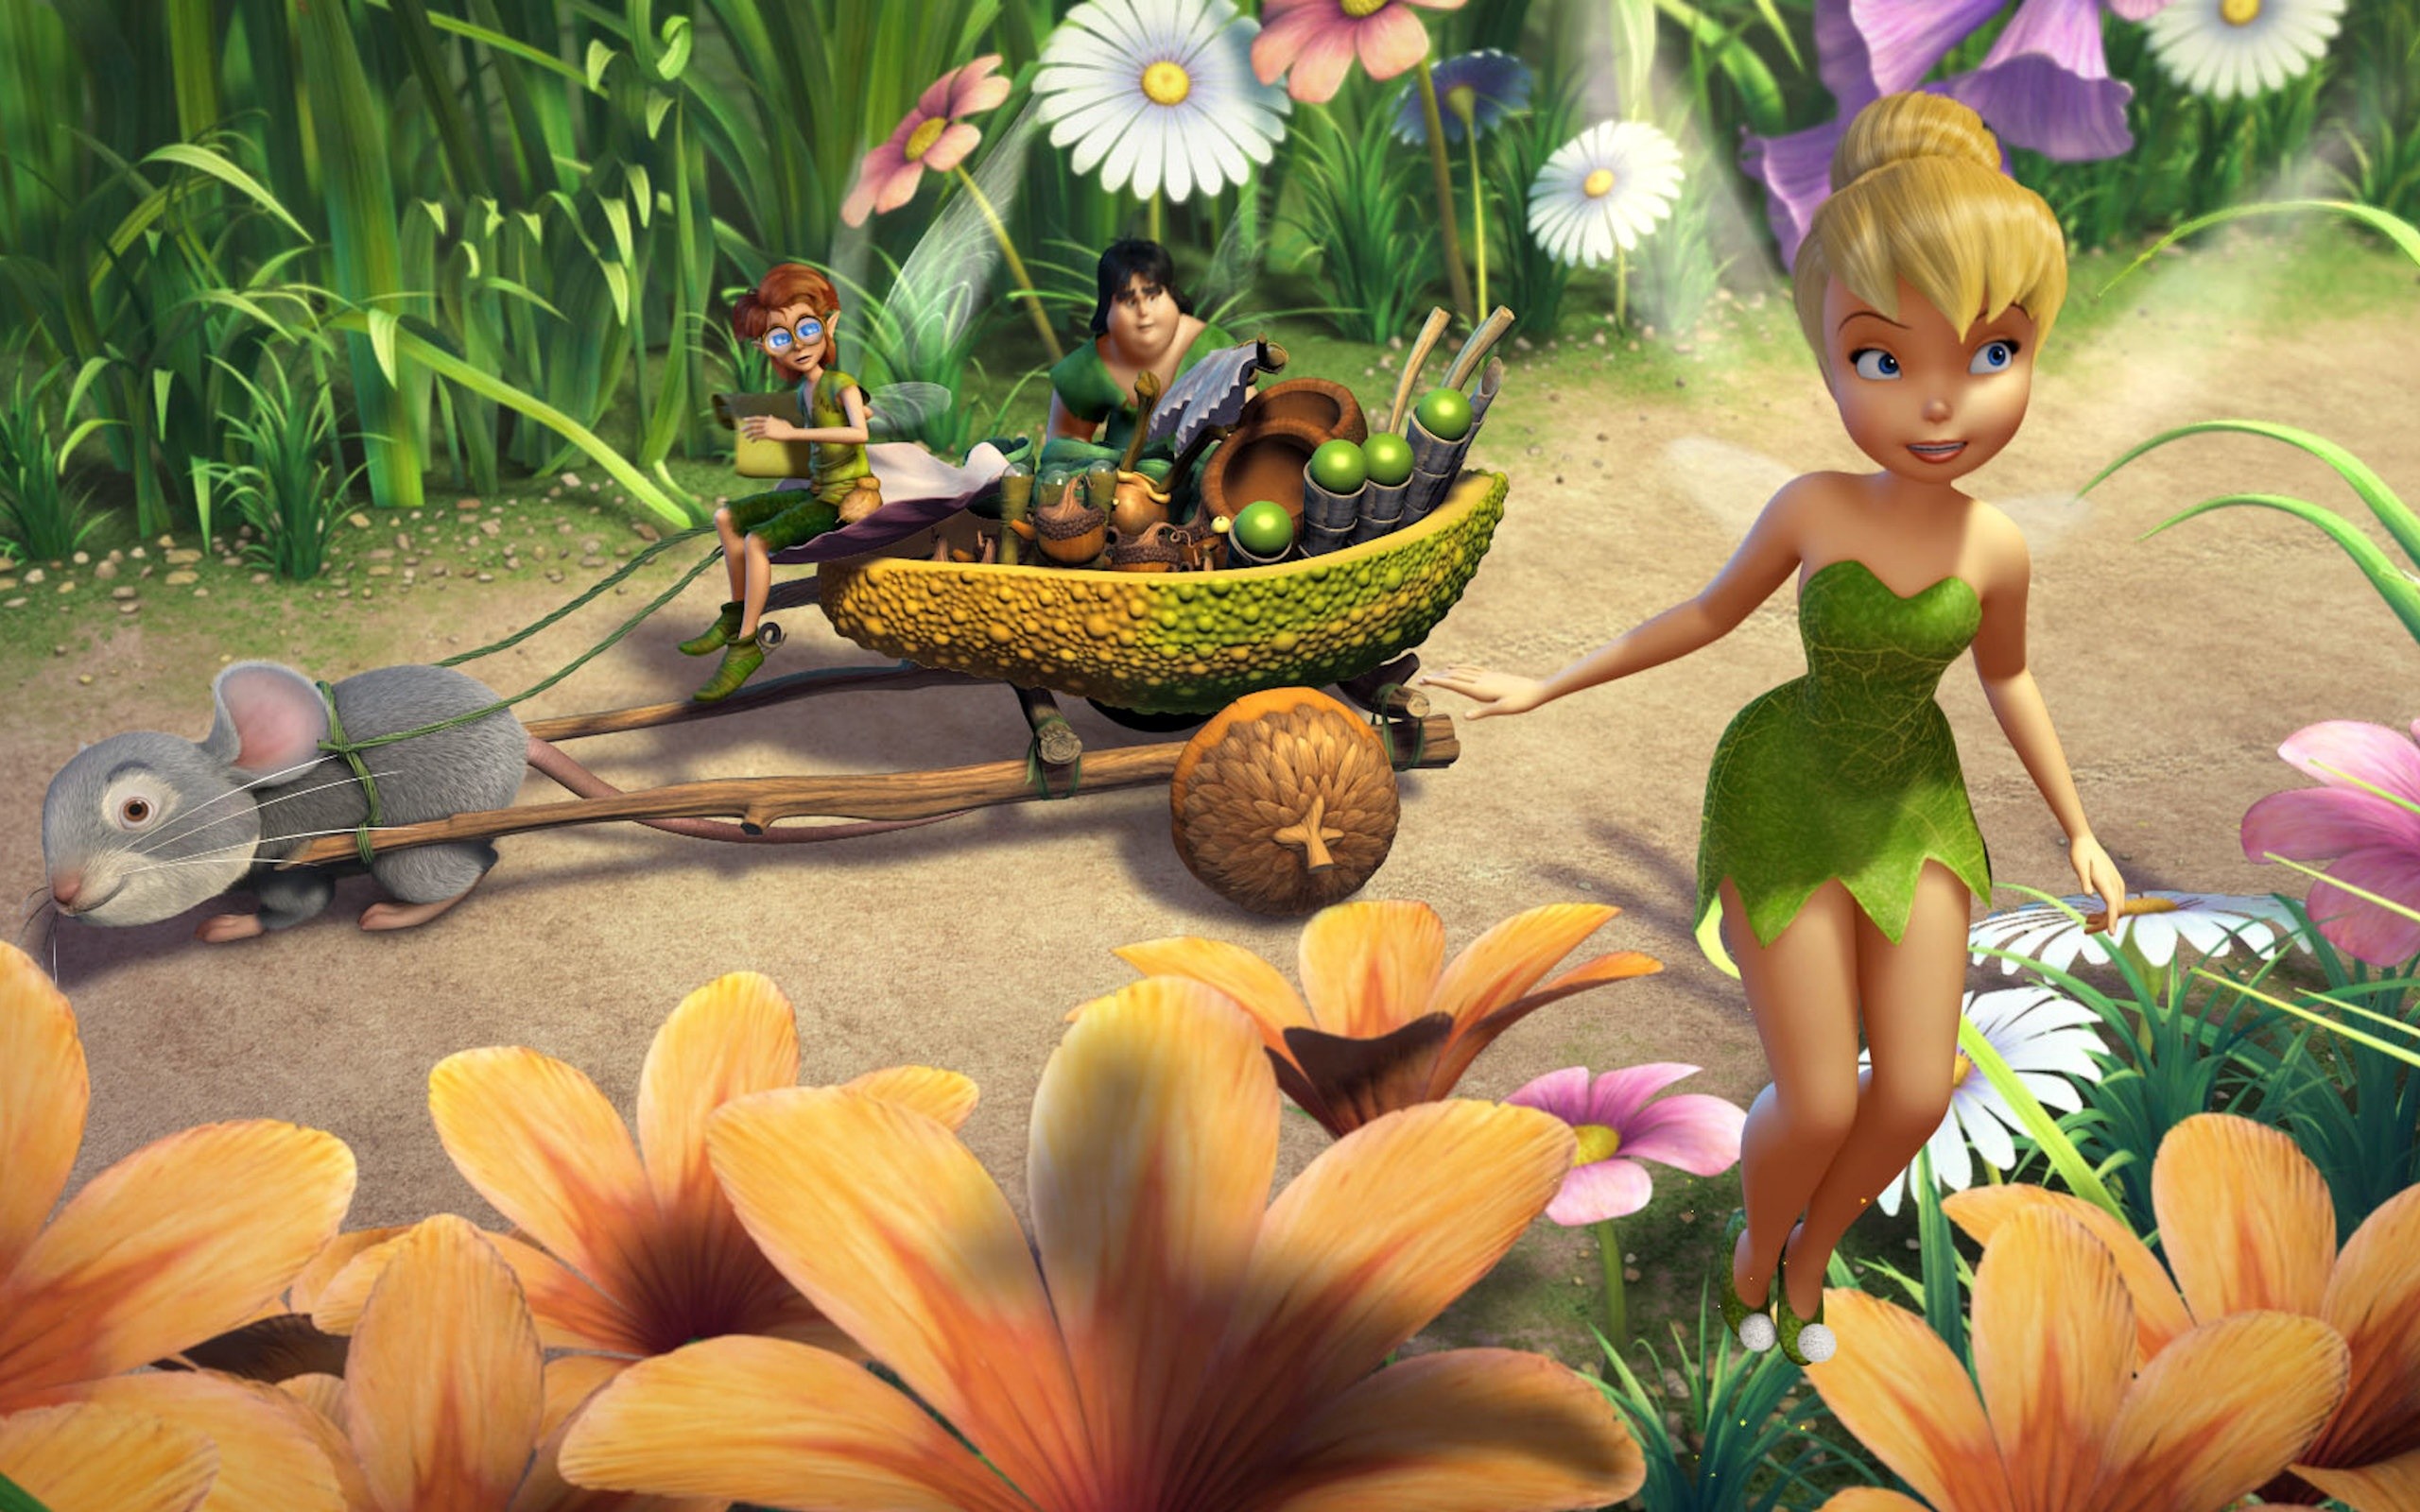 2560x1600 Disney Tinkerbell Images Download.